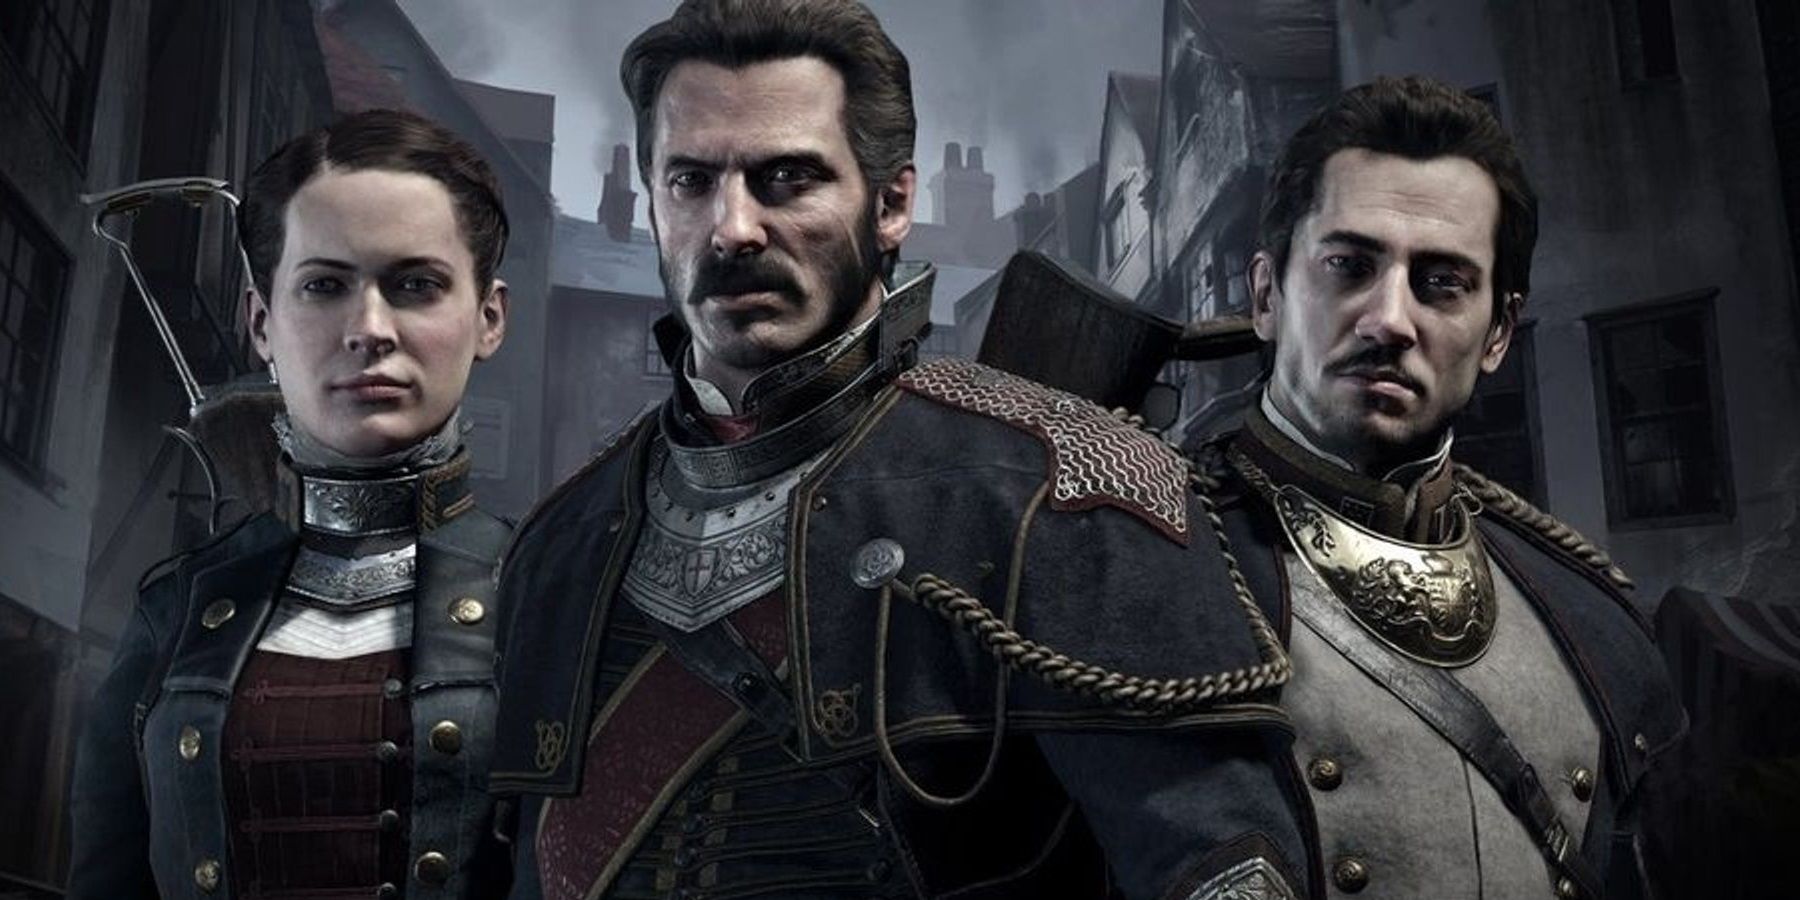 One player gives a glimpse what a PS5 update to The Order: 1886 looks like.